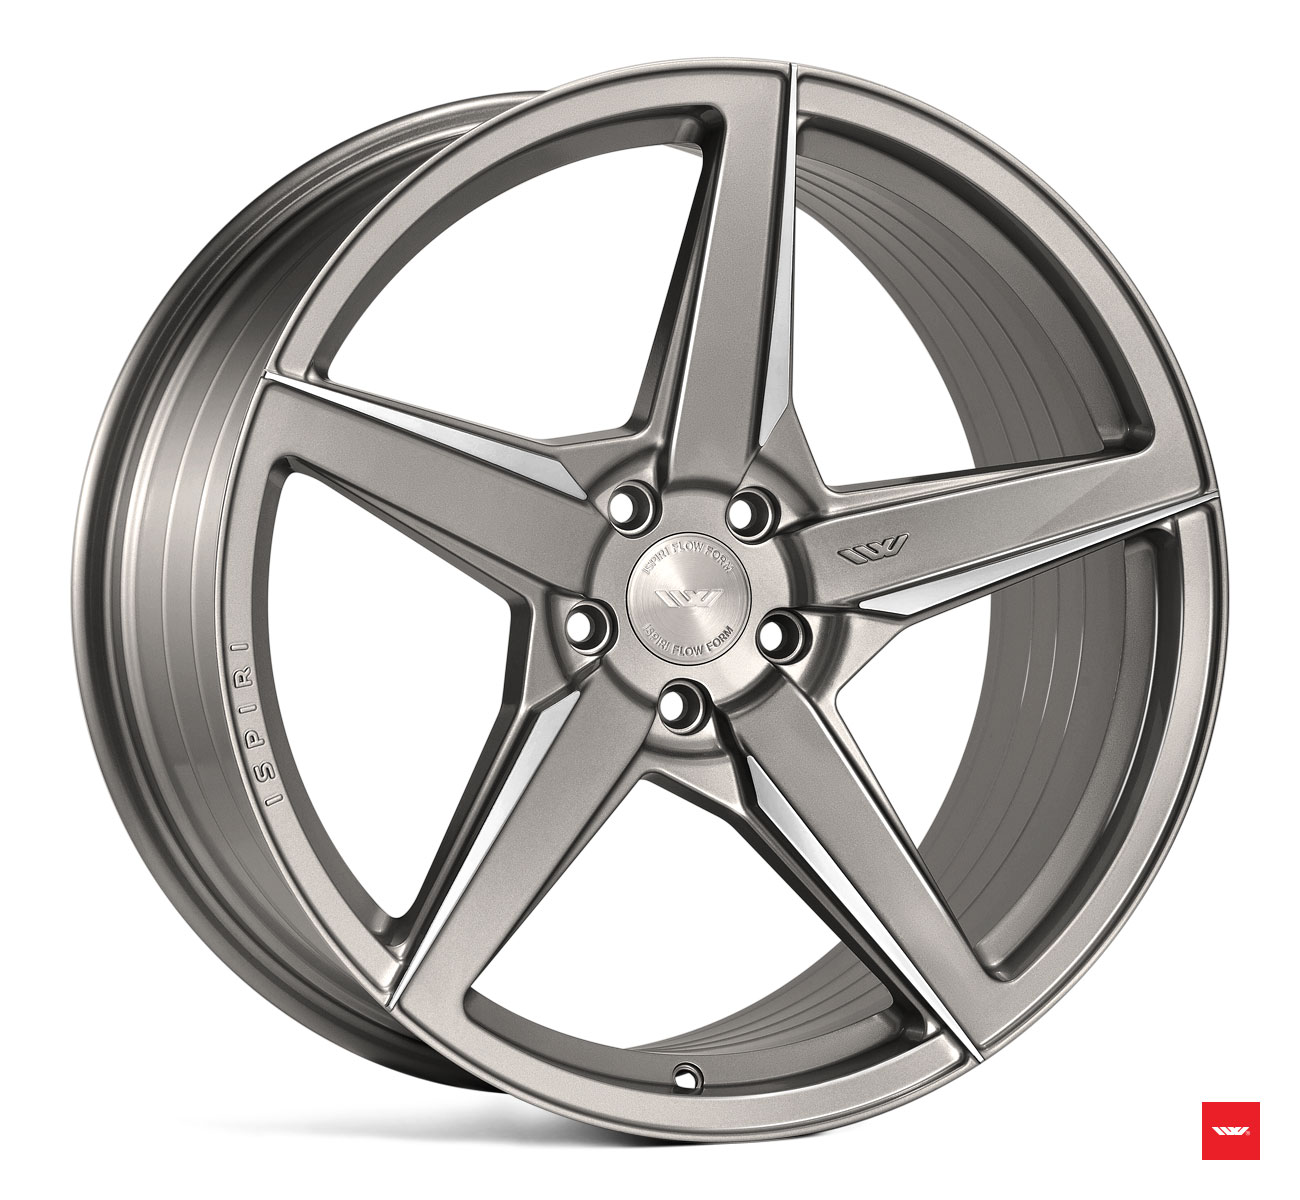 NEW 20" ISPIRI FFR5 5 SPOKE ALLOY WHEELS IN CARBON GREY BRUSHED, VARIOUS FITMENTS AVAILABLE